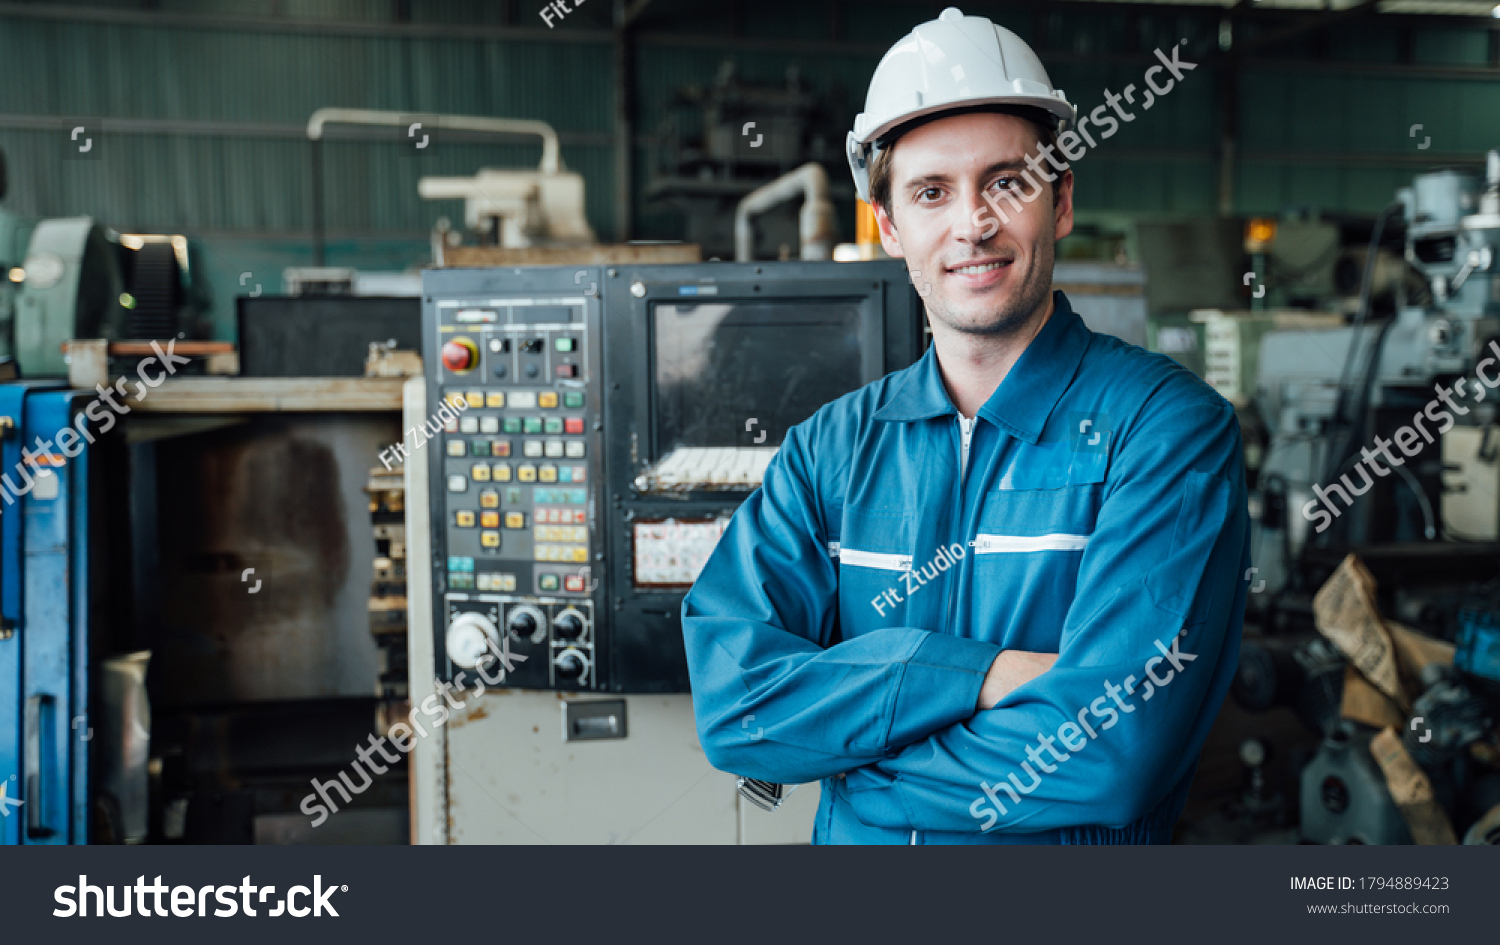 Engineer,Industry and construction concept. Portrait of caucasian Industry factory maintenance engineer wearing uniform and safety helmet in factory. #1794889423